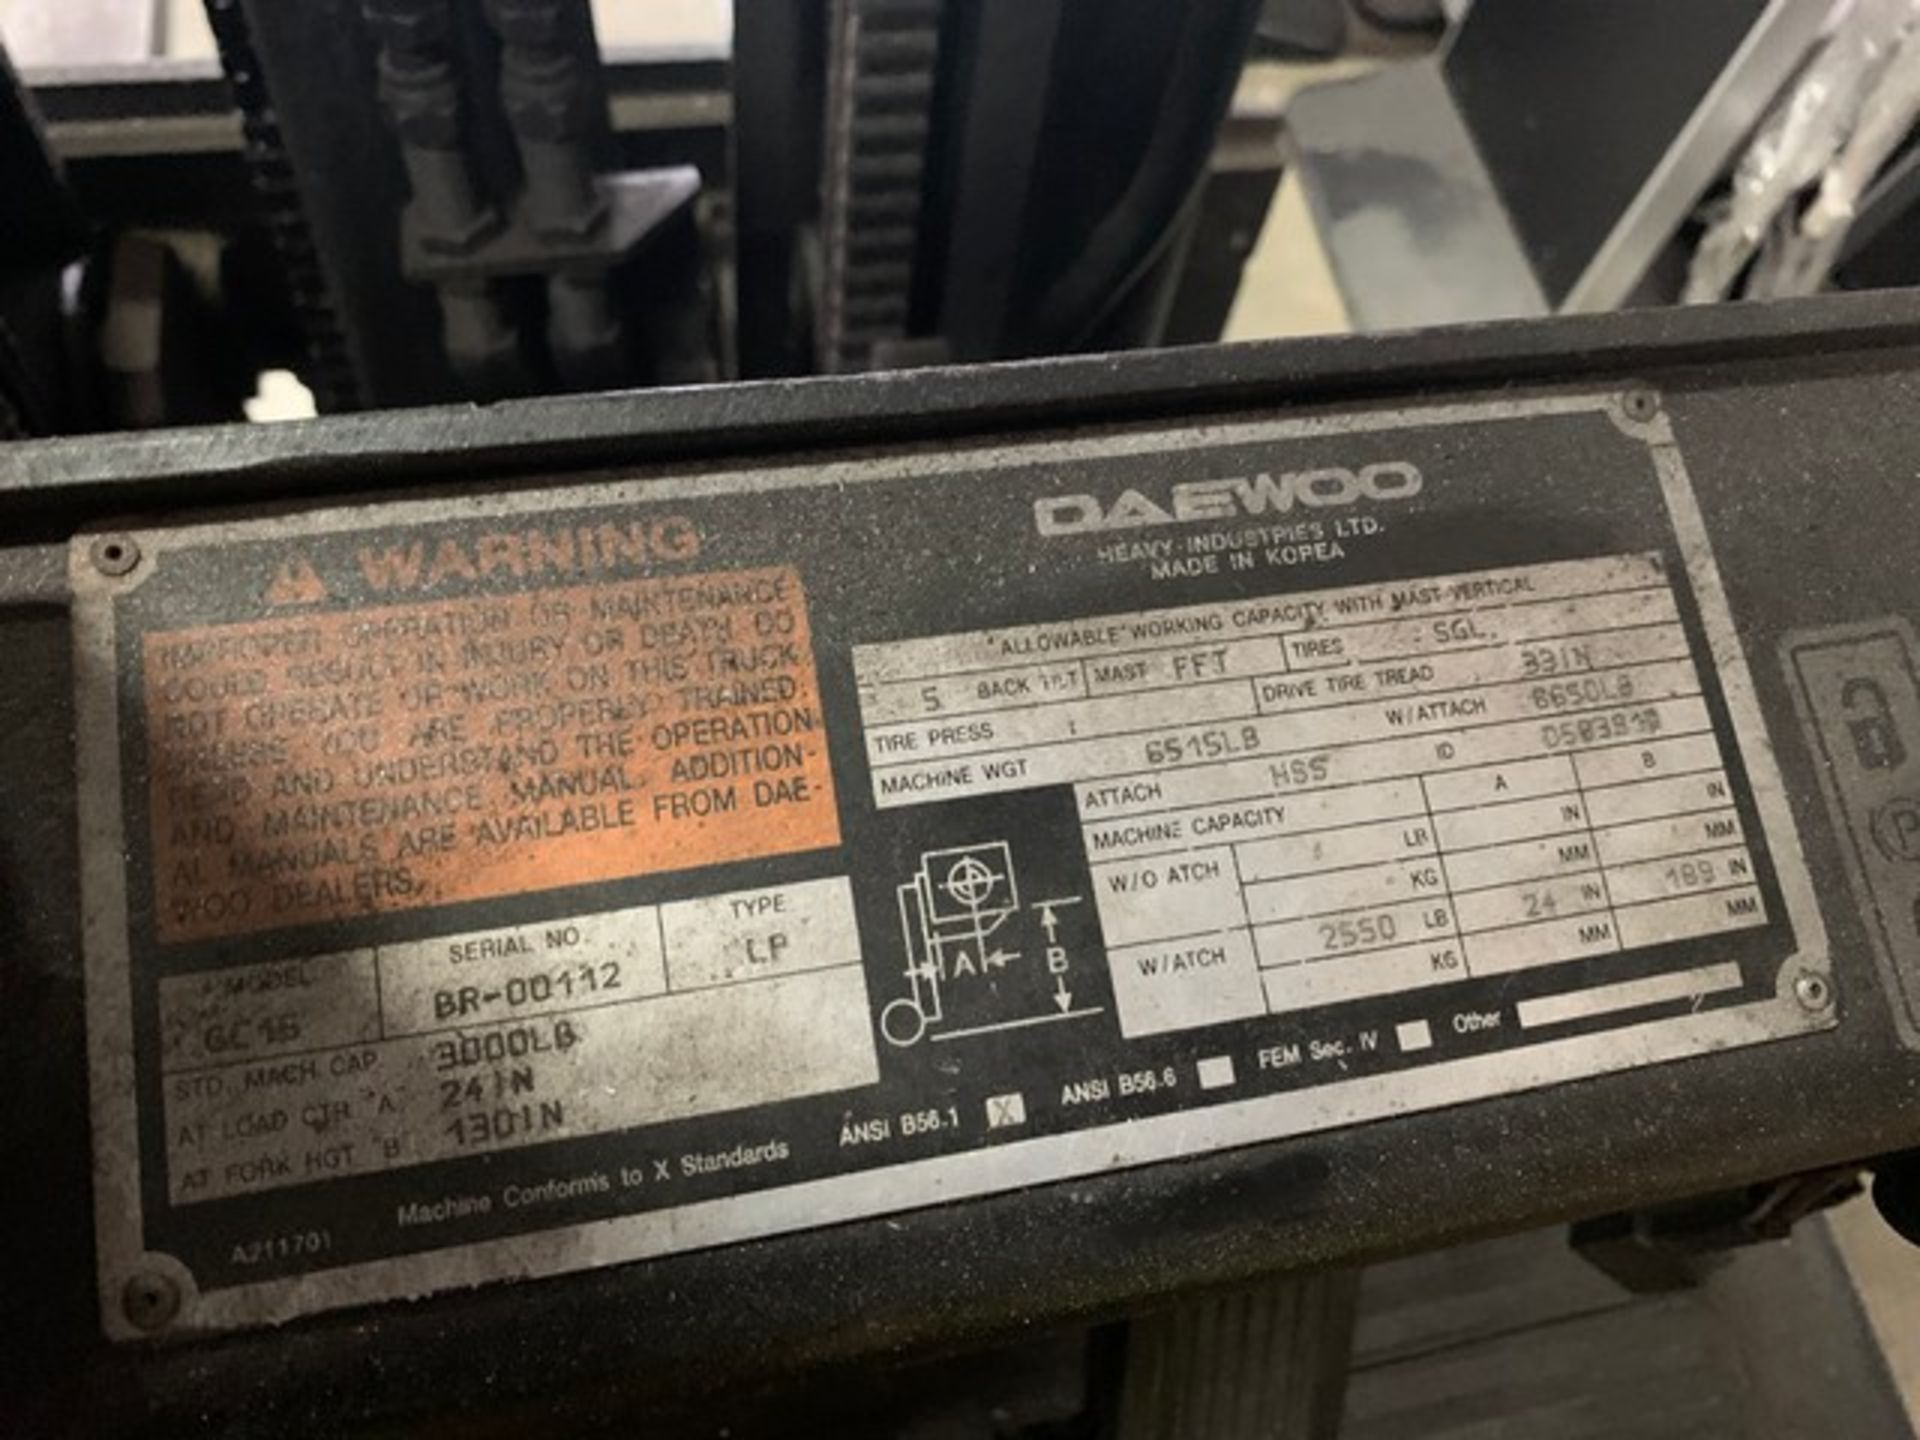 DAEWOO GL15 FORKLIFT - 3000LB CAPACITY / LPG / 3 STAGE / SIDE SHIFT / 14,954 HOURS / SERIAL No. BR-0 - Image 6 of 6